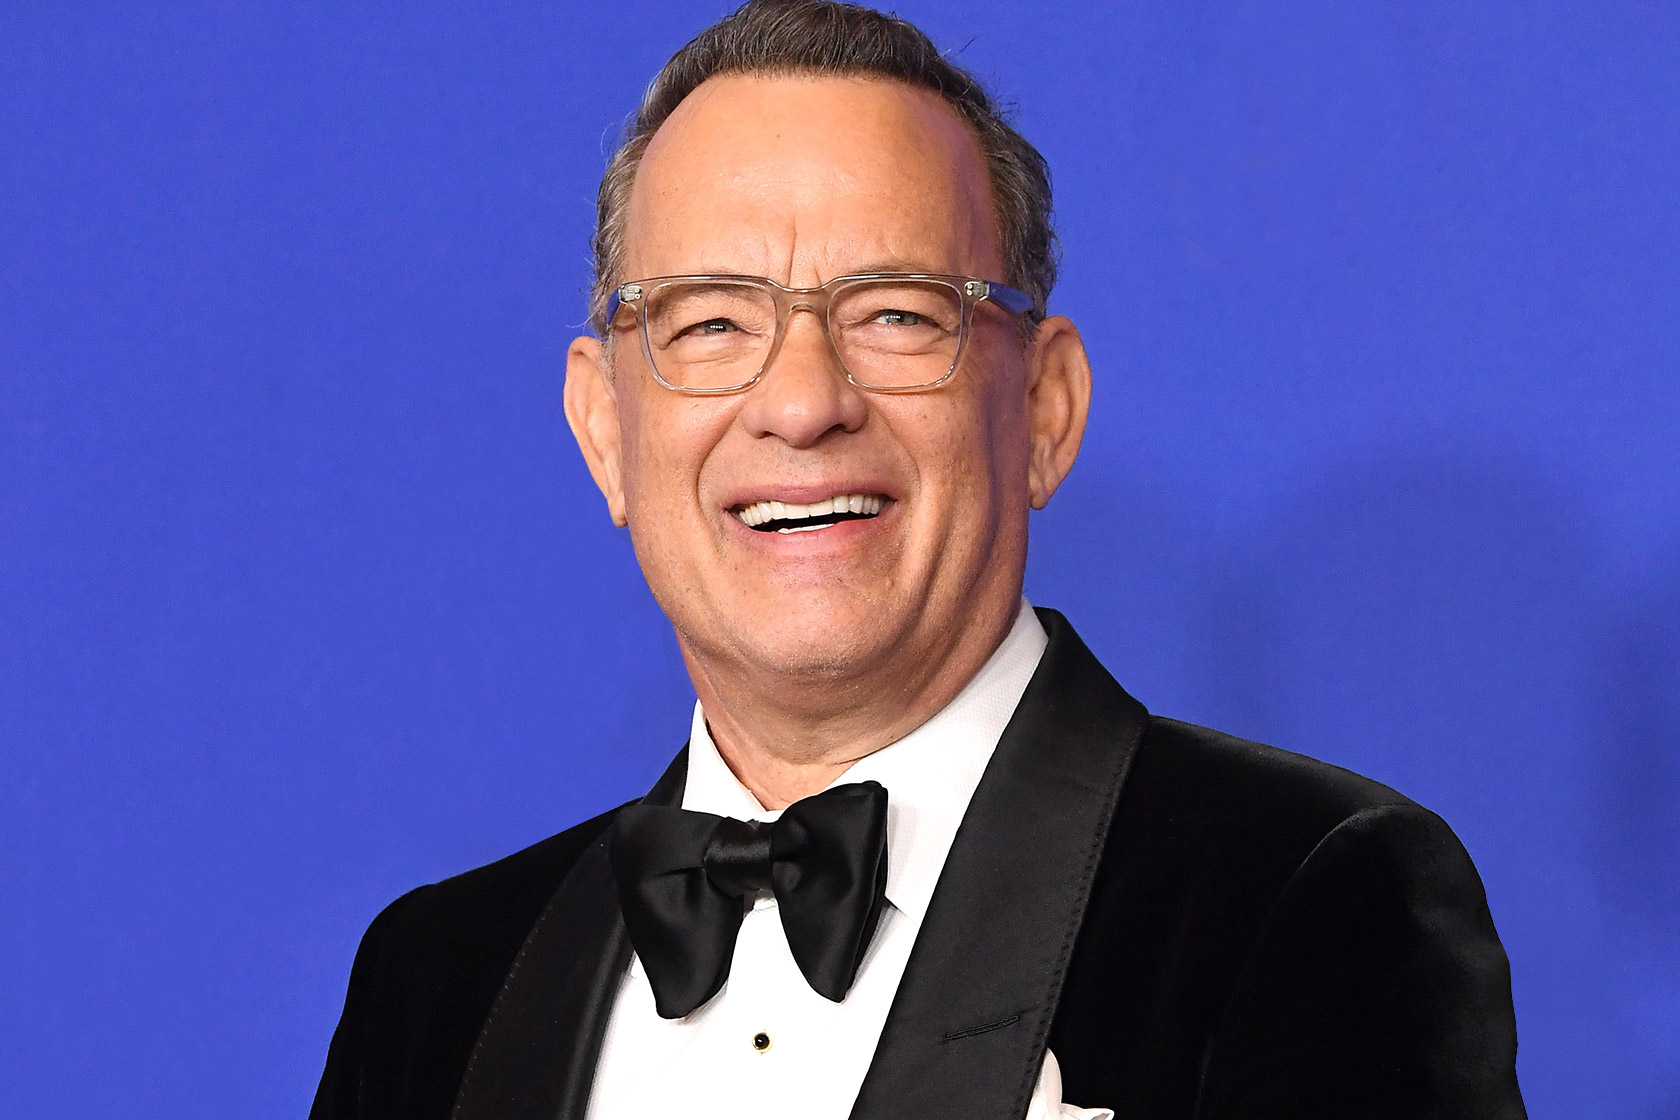 Tom Hanks is the nicest man in Hollywood, and these tweets confirm it